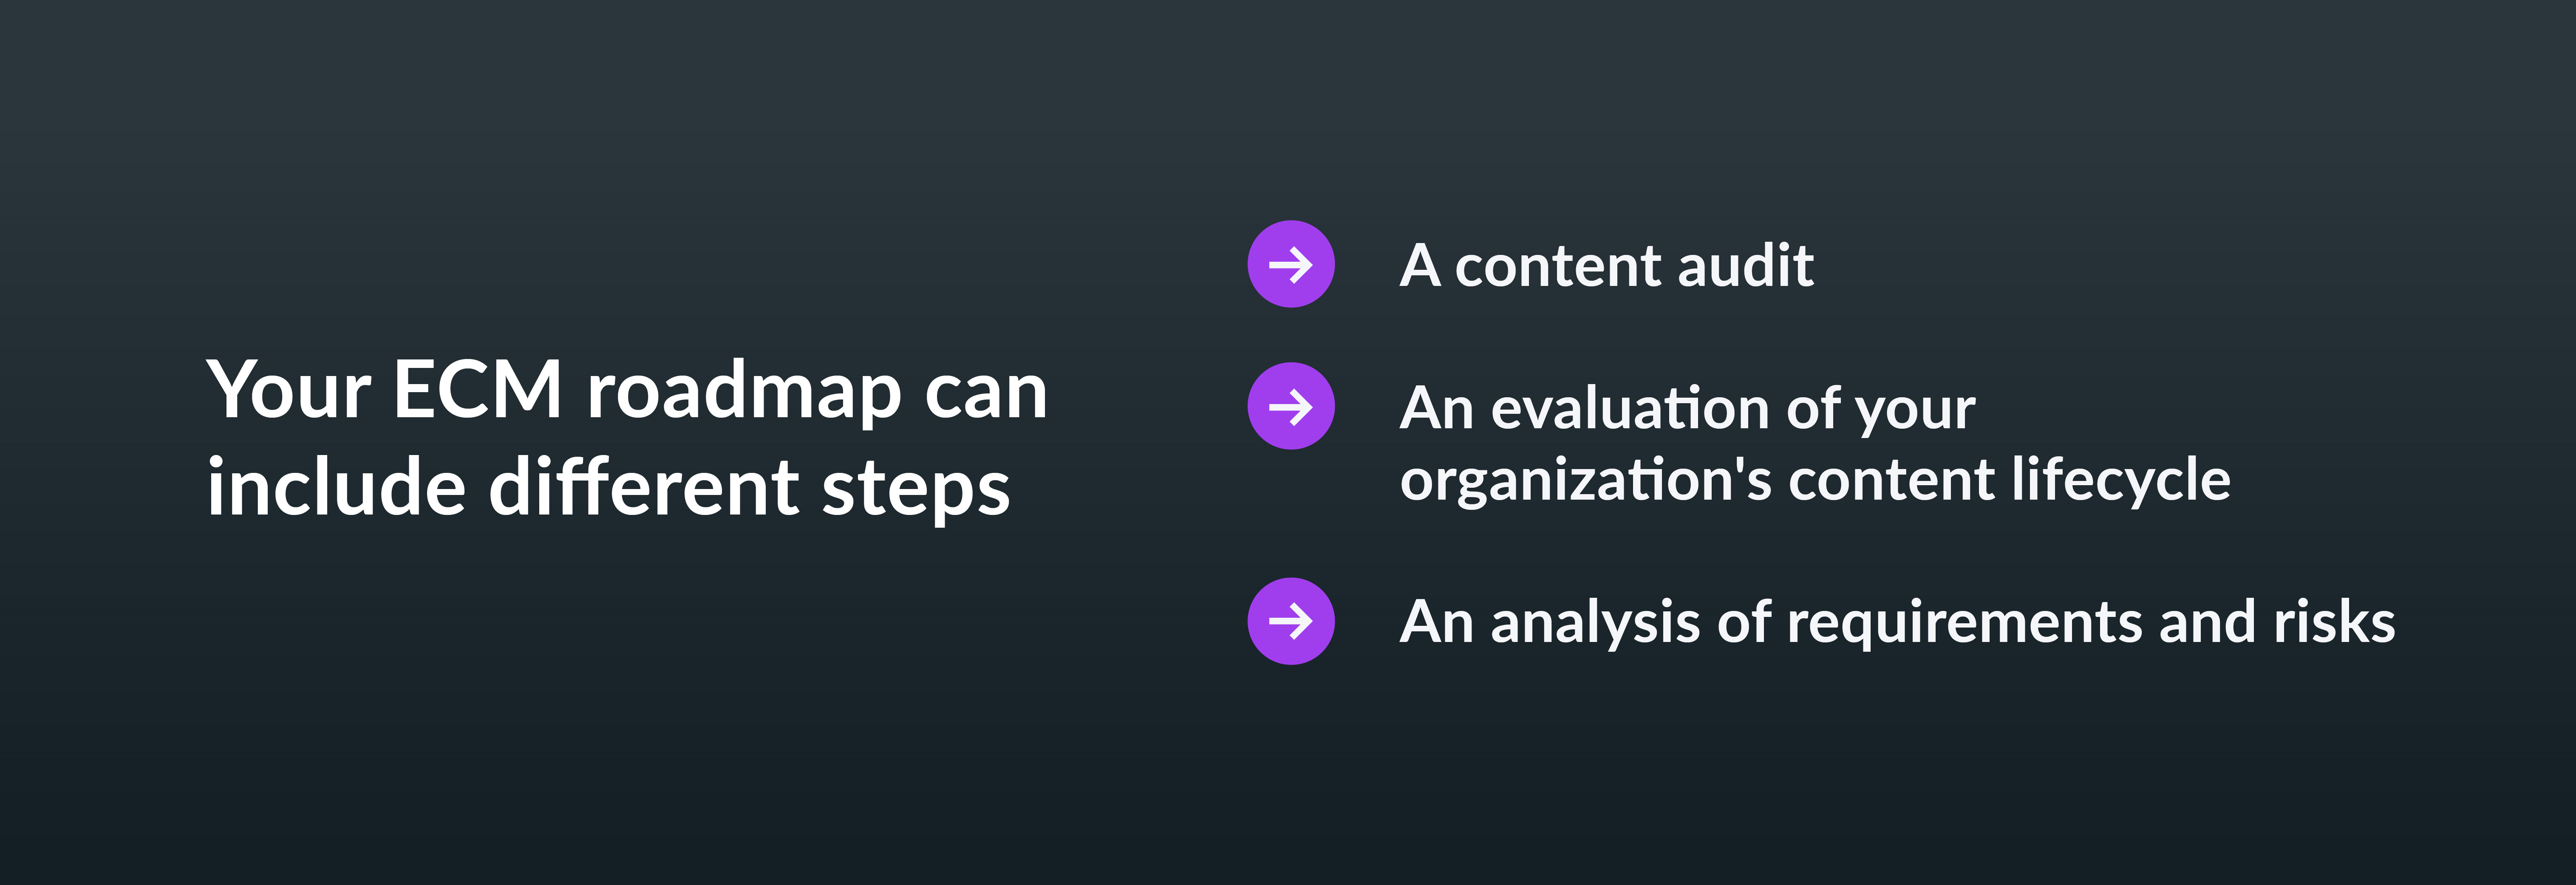 Your ECM roadmap can include different steps: a content audit, an evaluation of your organization's content lifecycle, an analysis of requirements and risks